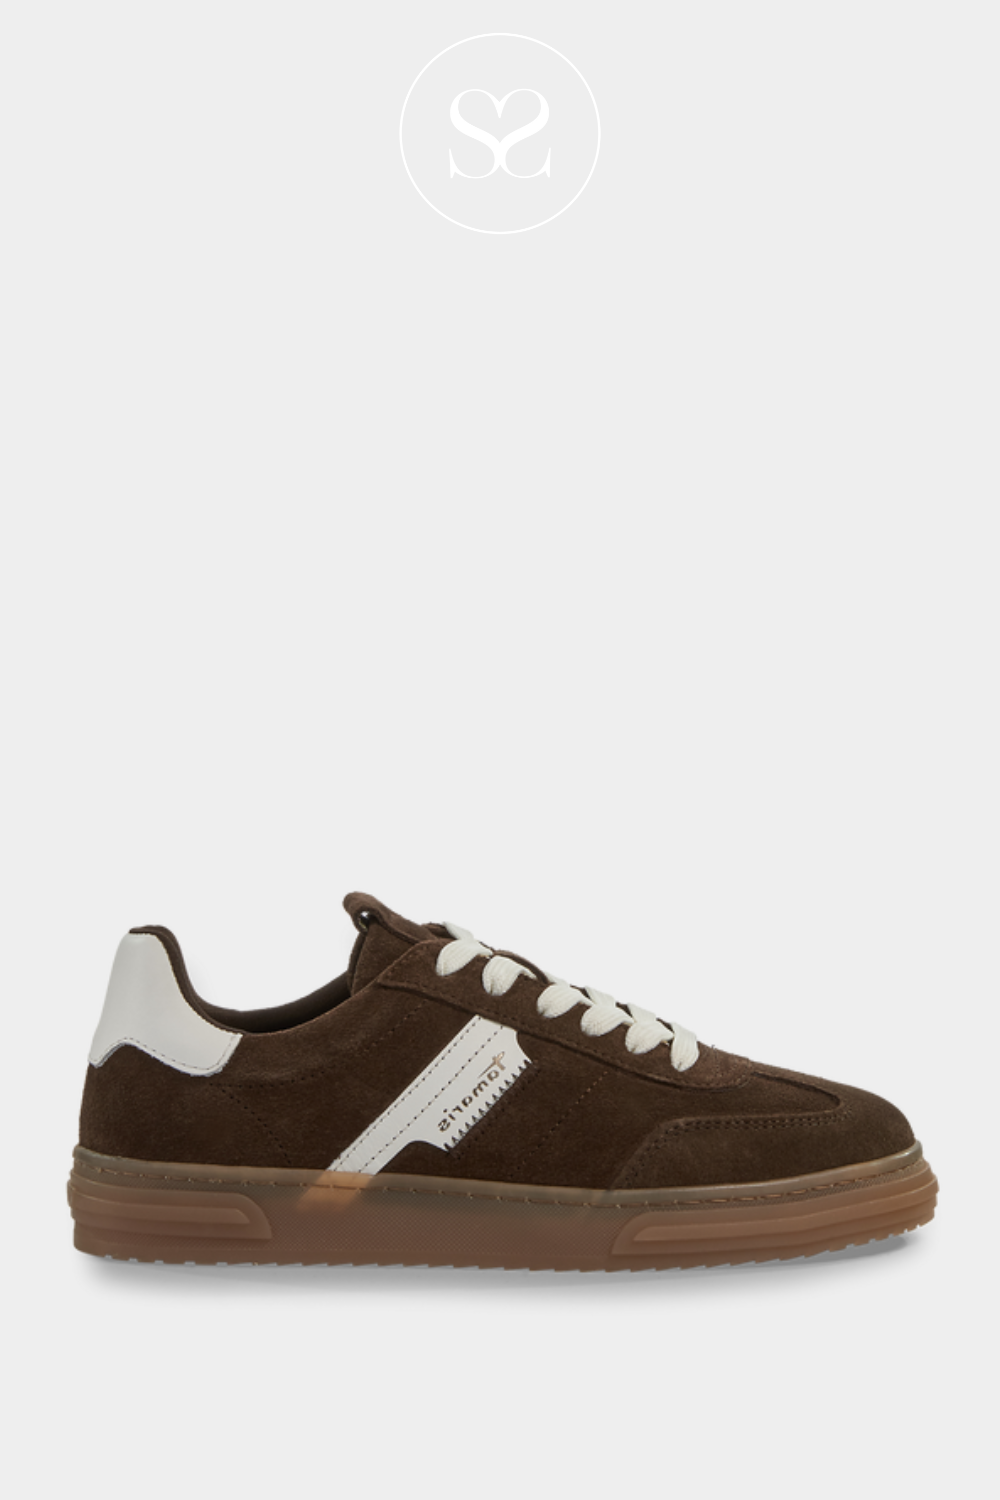 BUY TAMARIS 1-23788-42 BROWN LEATHER SPORTY TRAINERS